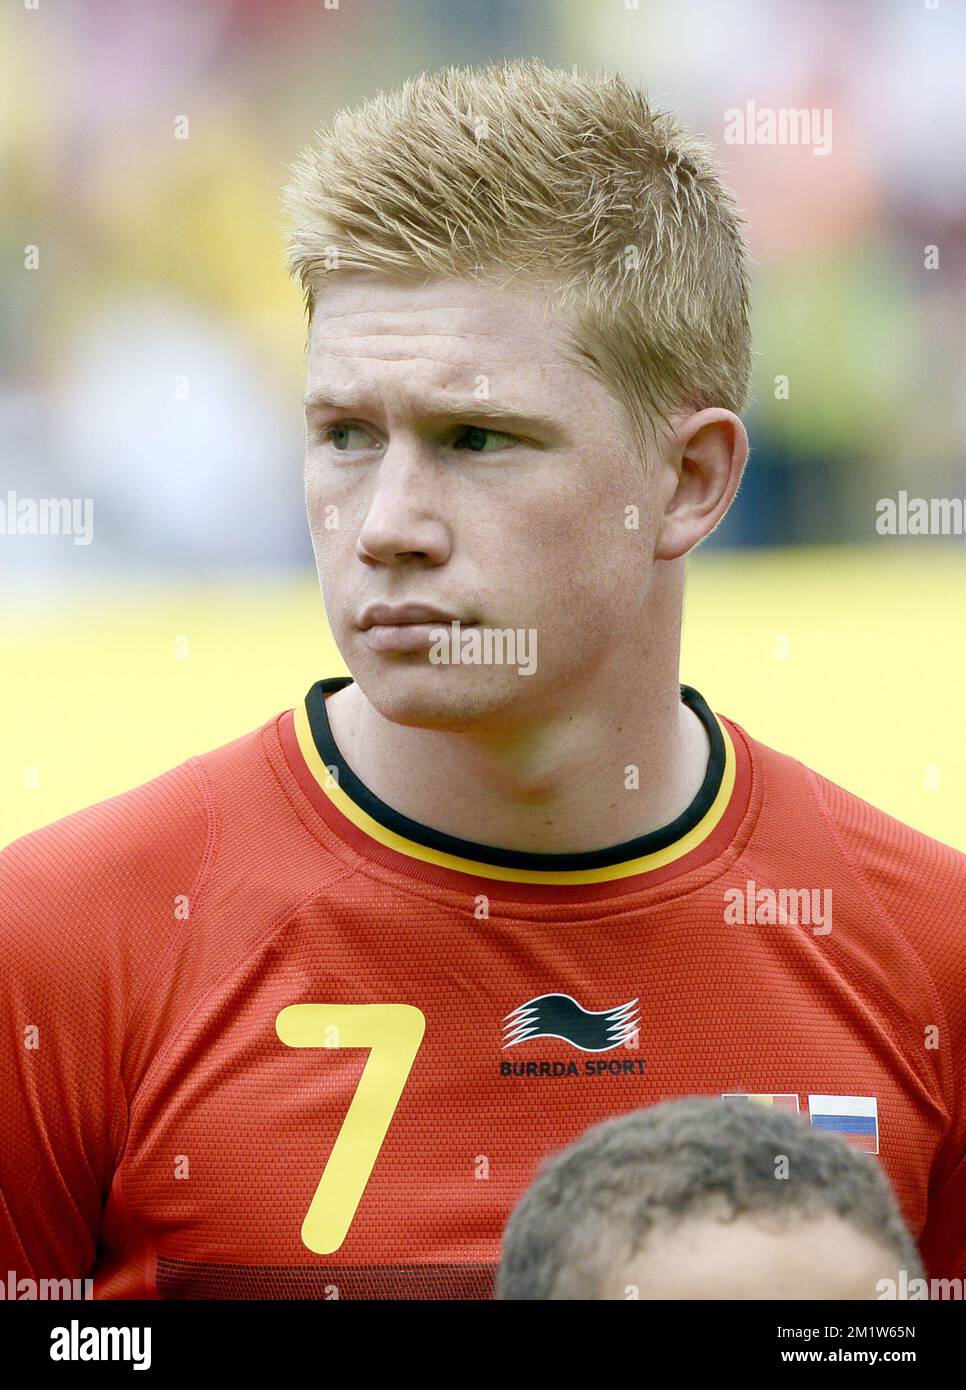 20140622 - RIO DE JANEIRO, BRAZIL: Belgium's Kevin De Bruyne pictured at the start of a soccer game between Belgian national team The Red Devils and Russia in Rio de Janeiro, Brazil, the second game in Group H of the first round of the 2014 FIFA World Cup, Sunday 22 June 2014.   BELGA PHOTO DIRK WAEM Stock Photo